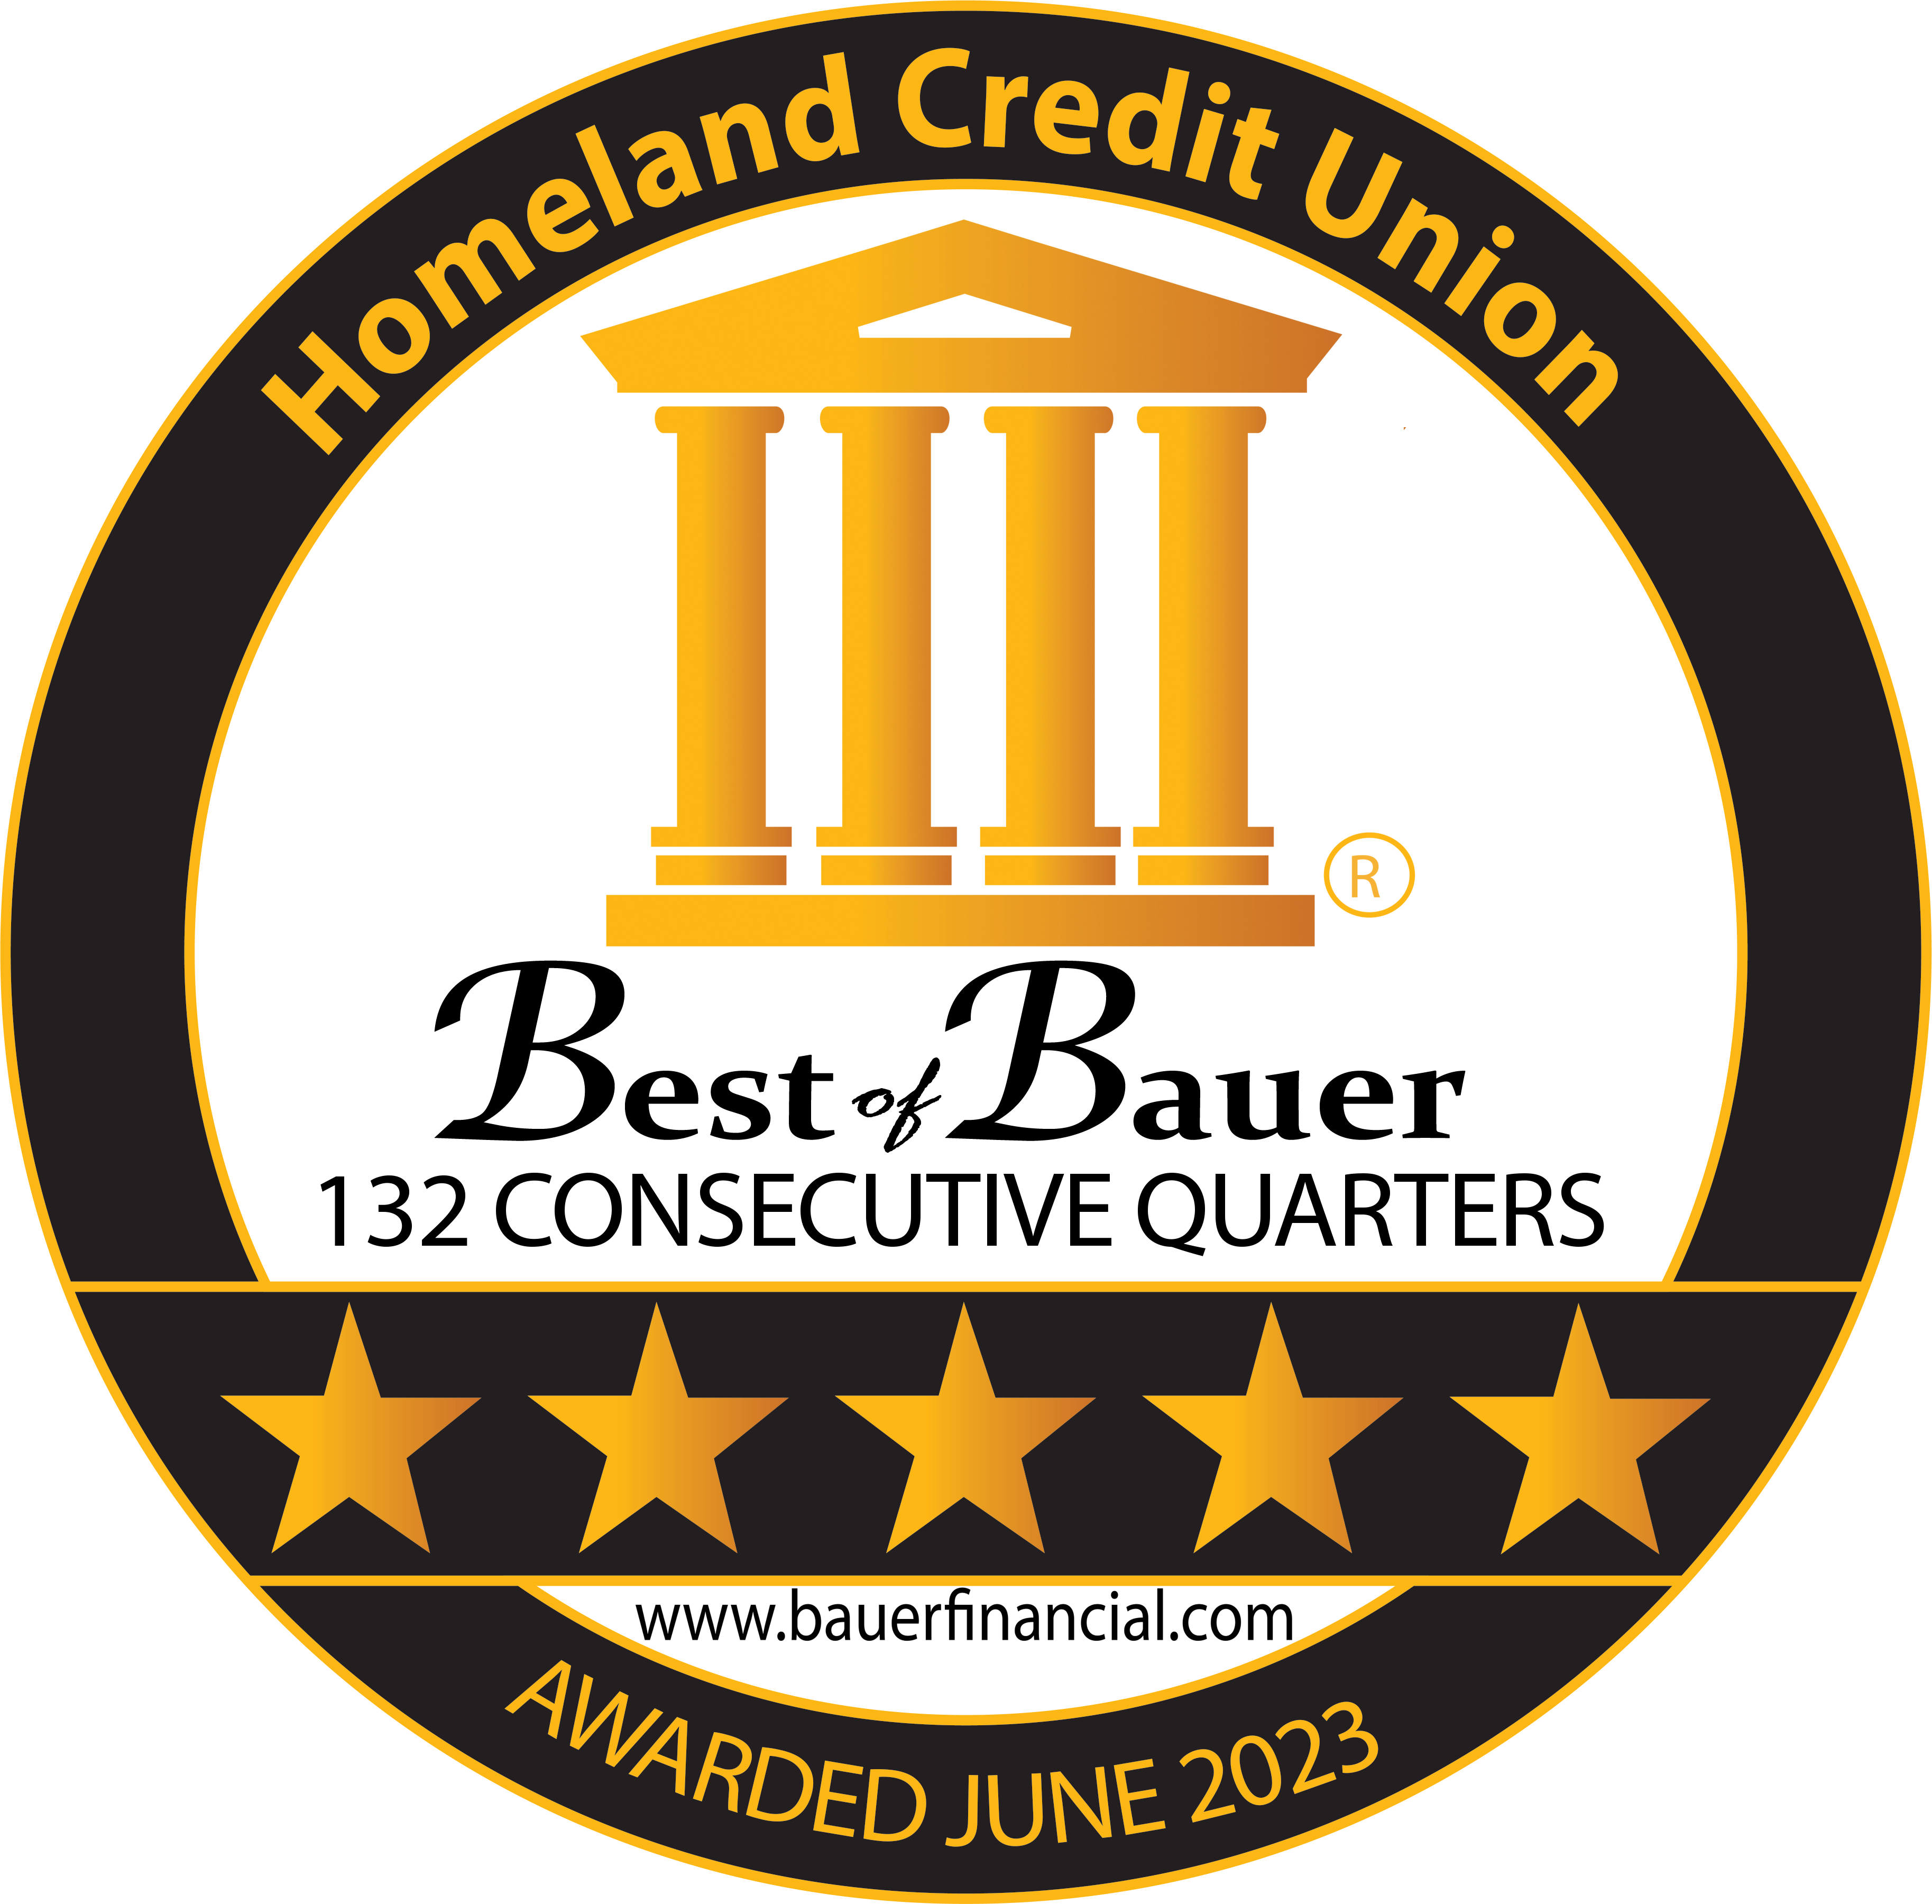 Homeland Credit Union Best of Bauer 132 Consecutive Quarters. Awarded June 2023